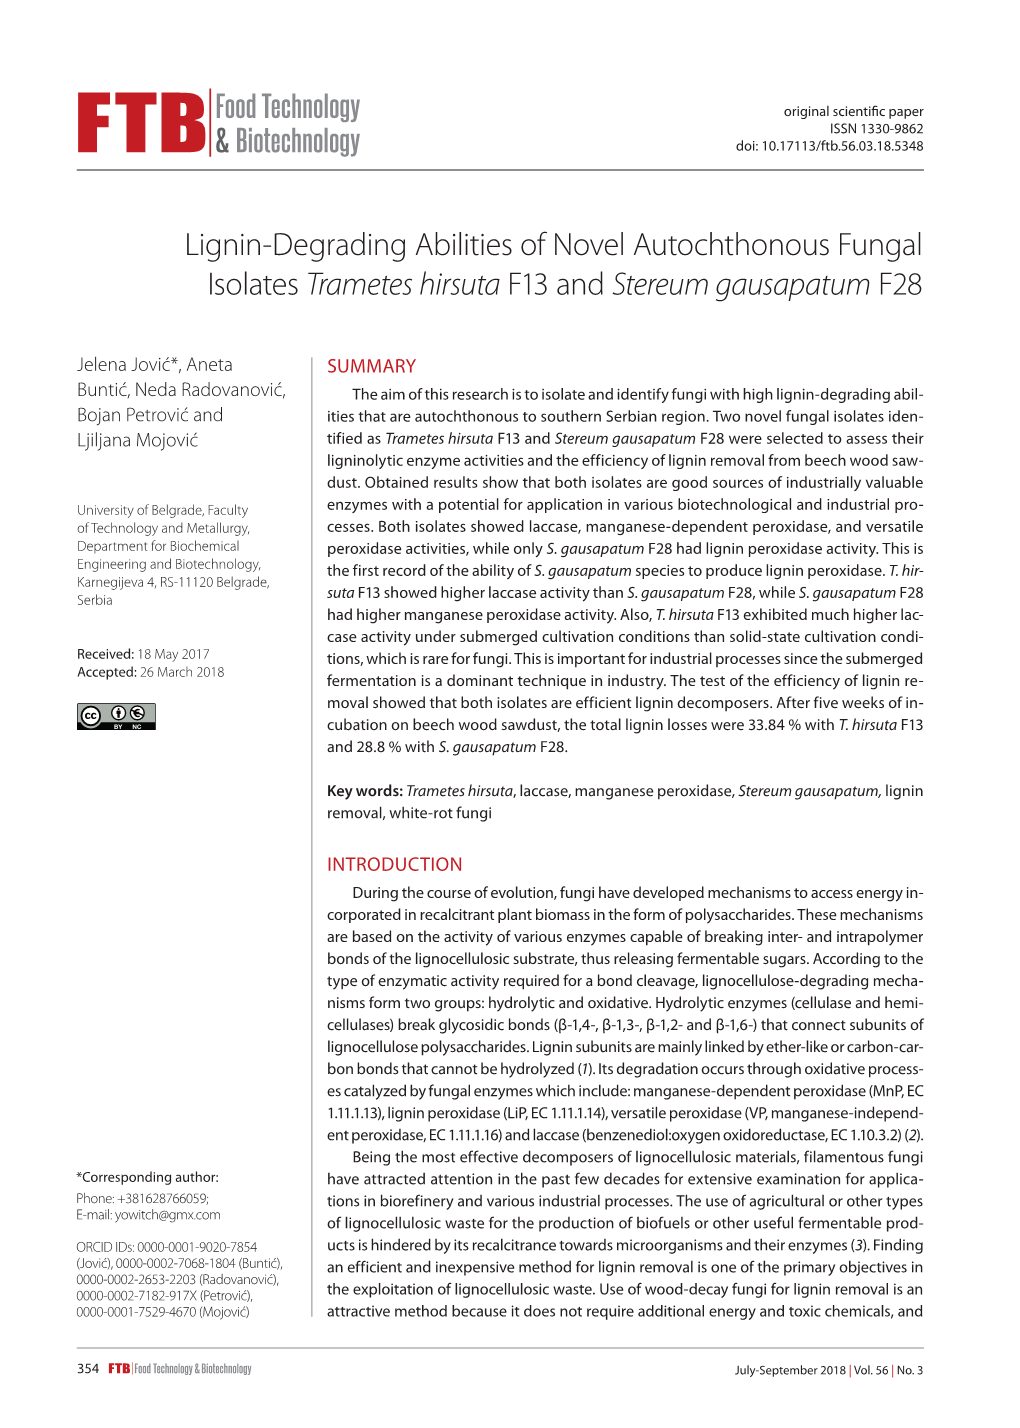 Lignin-Degrading Abilities of Novel Autochthonous Fungal Isolates Trametes Hirsuta F13 and Stereum Gausapatum F28